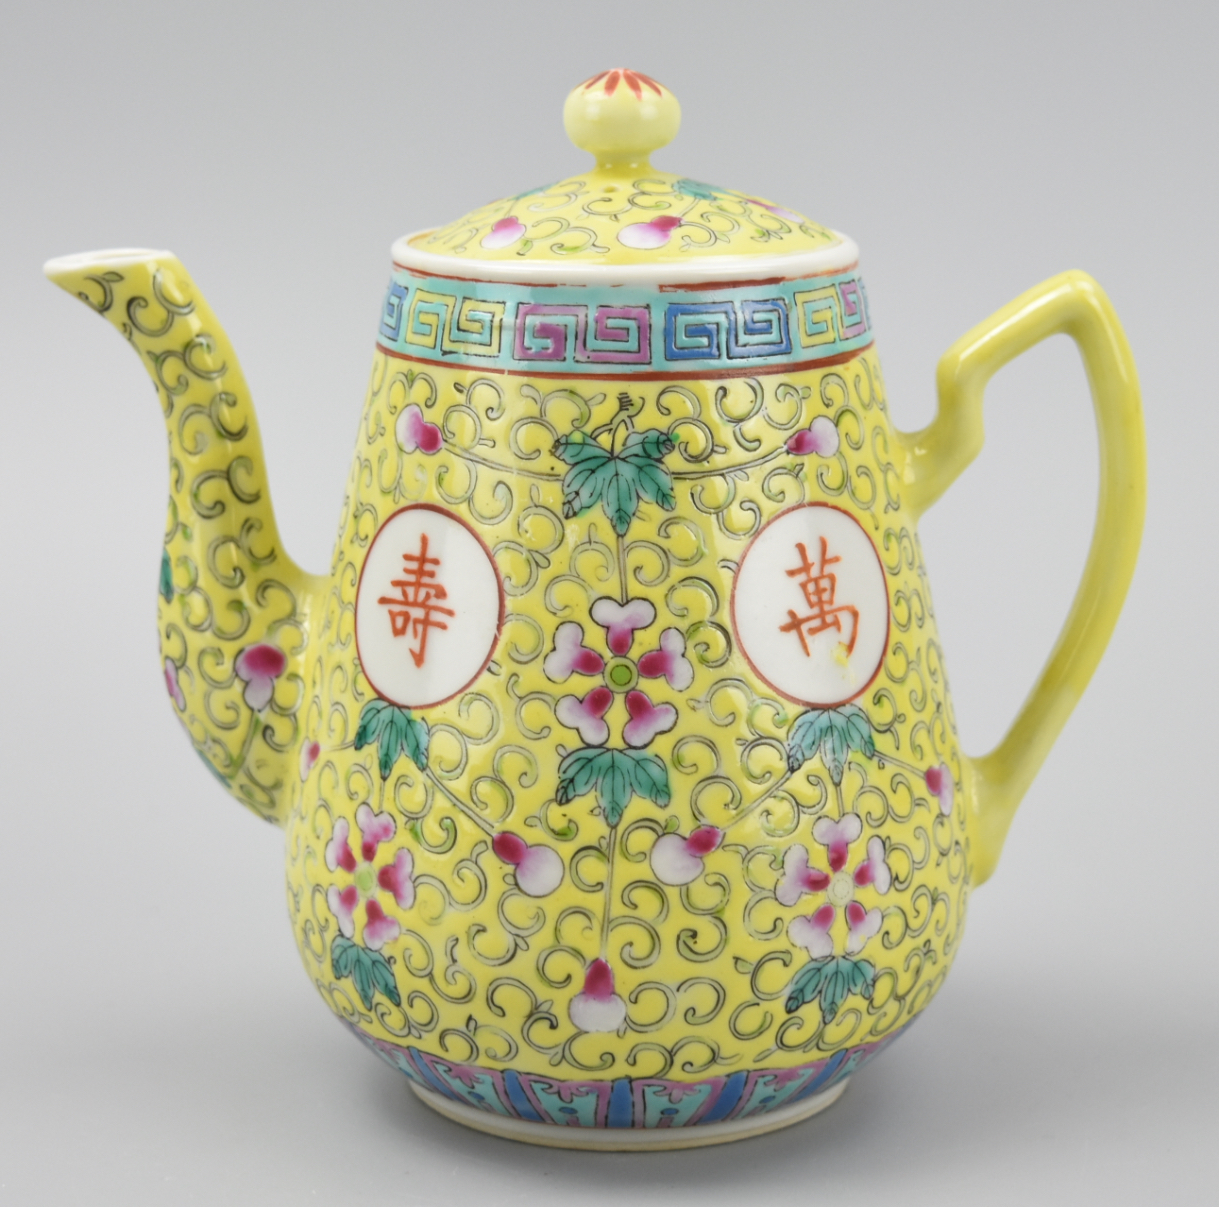 CHINESE YELLOW FAMILLE ROSE TEAPOT